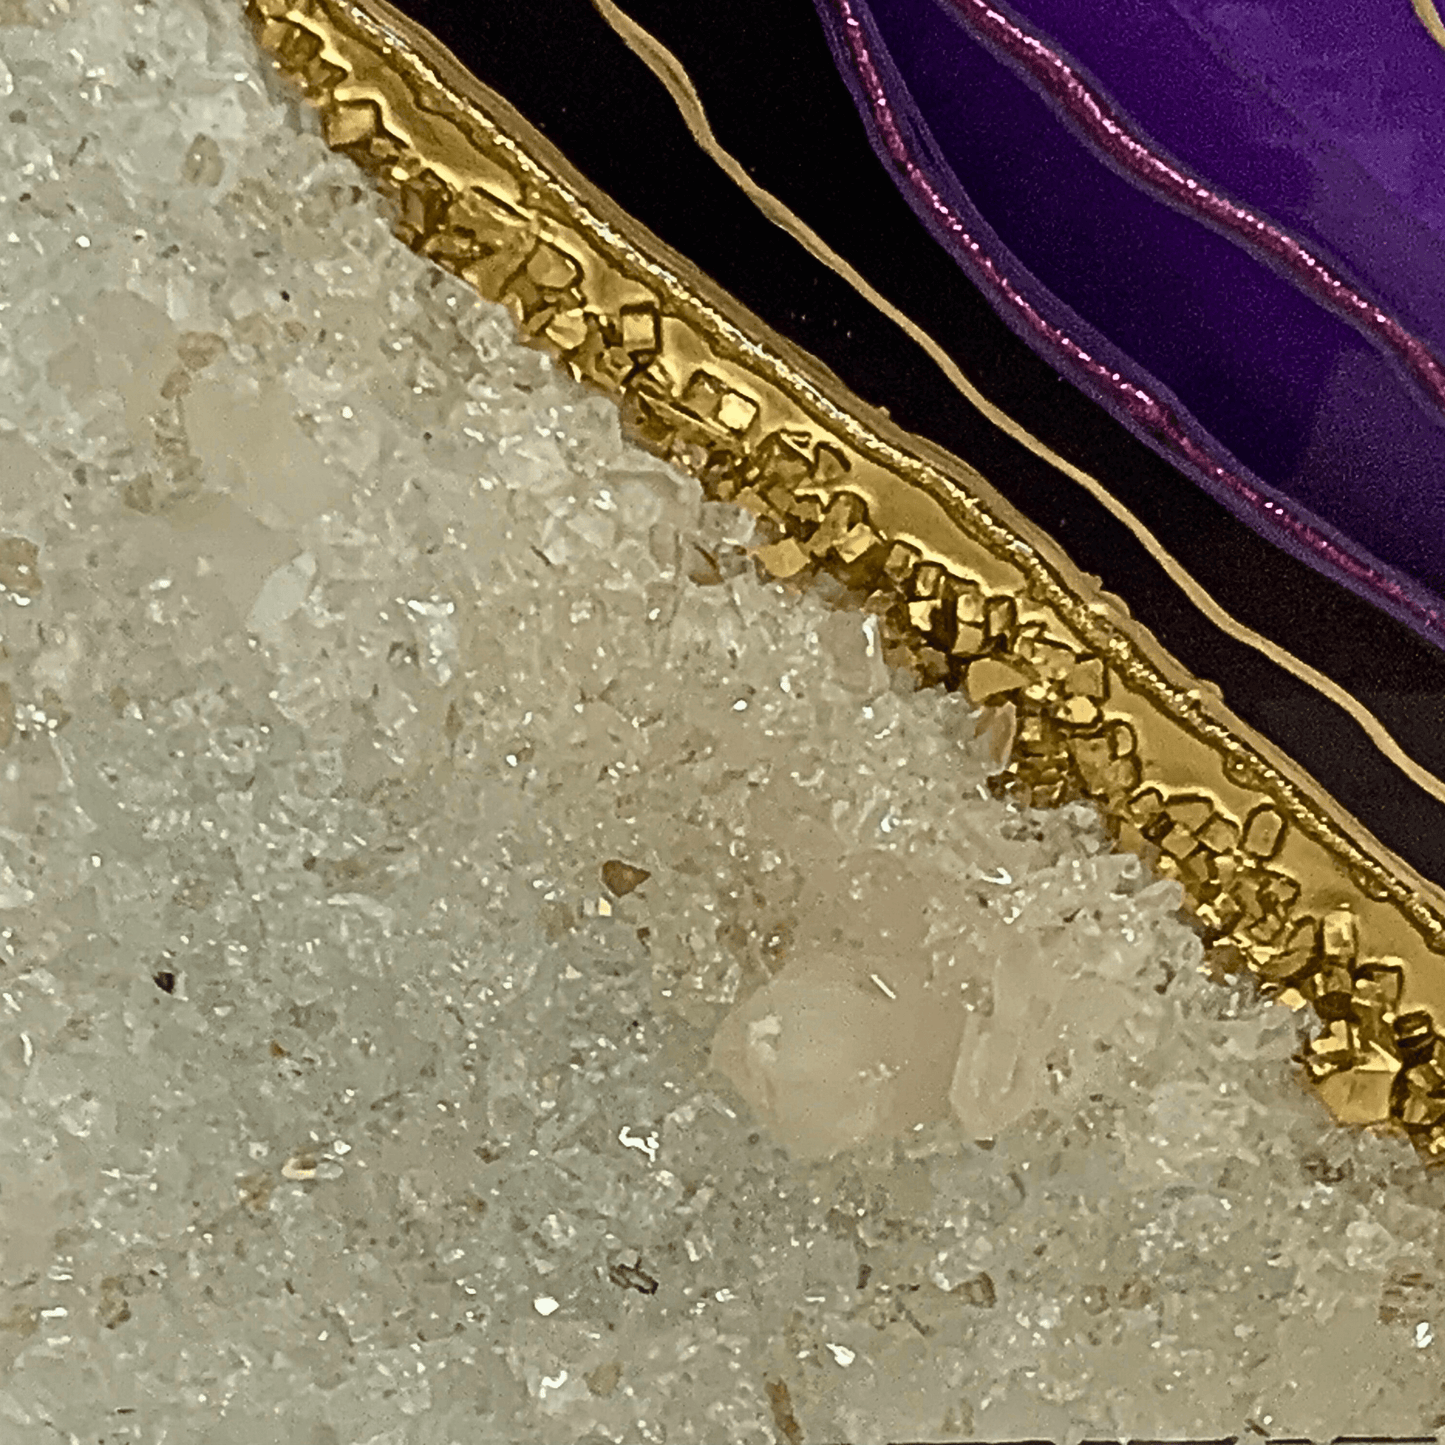 Royal Purple & Gold Resin Geode Modern Art with Real Crystal Quartz